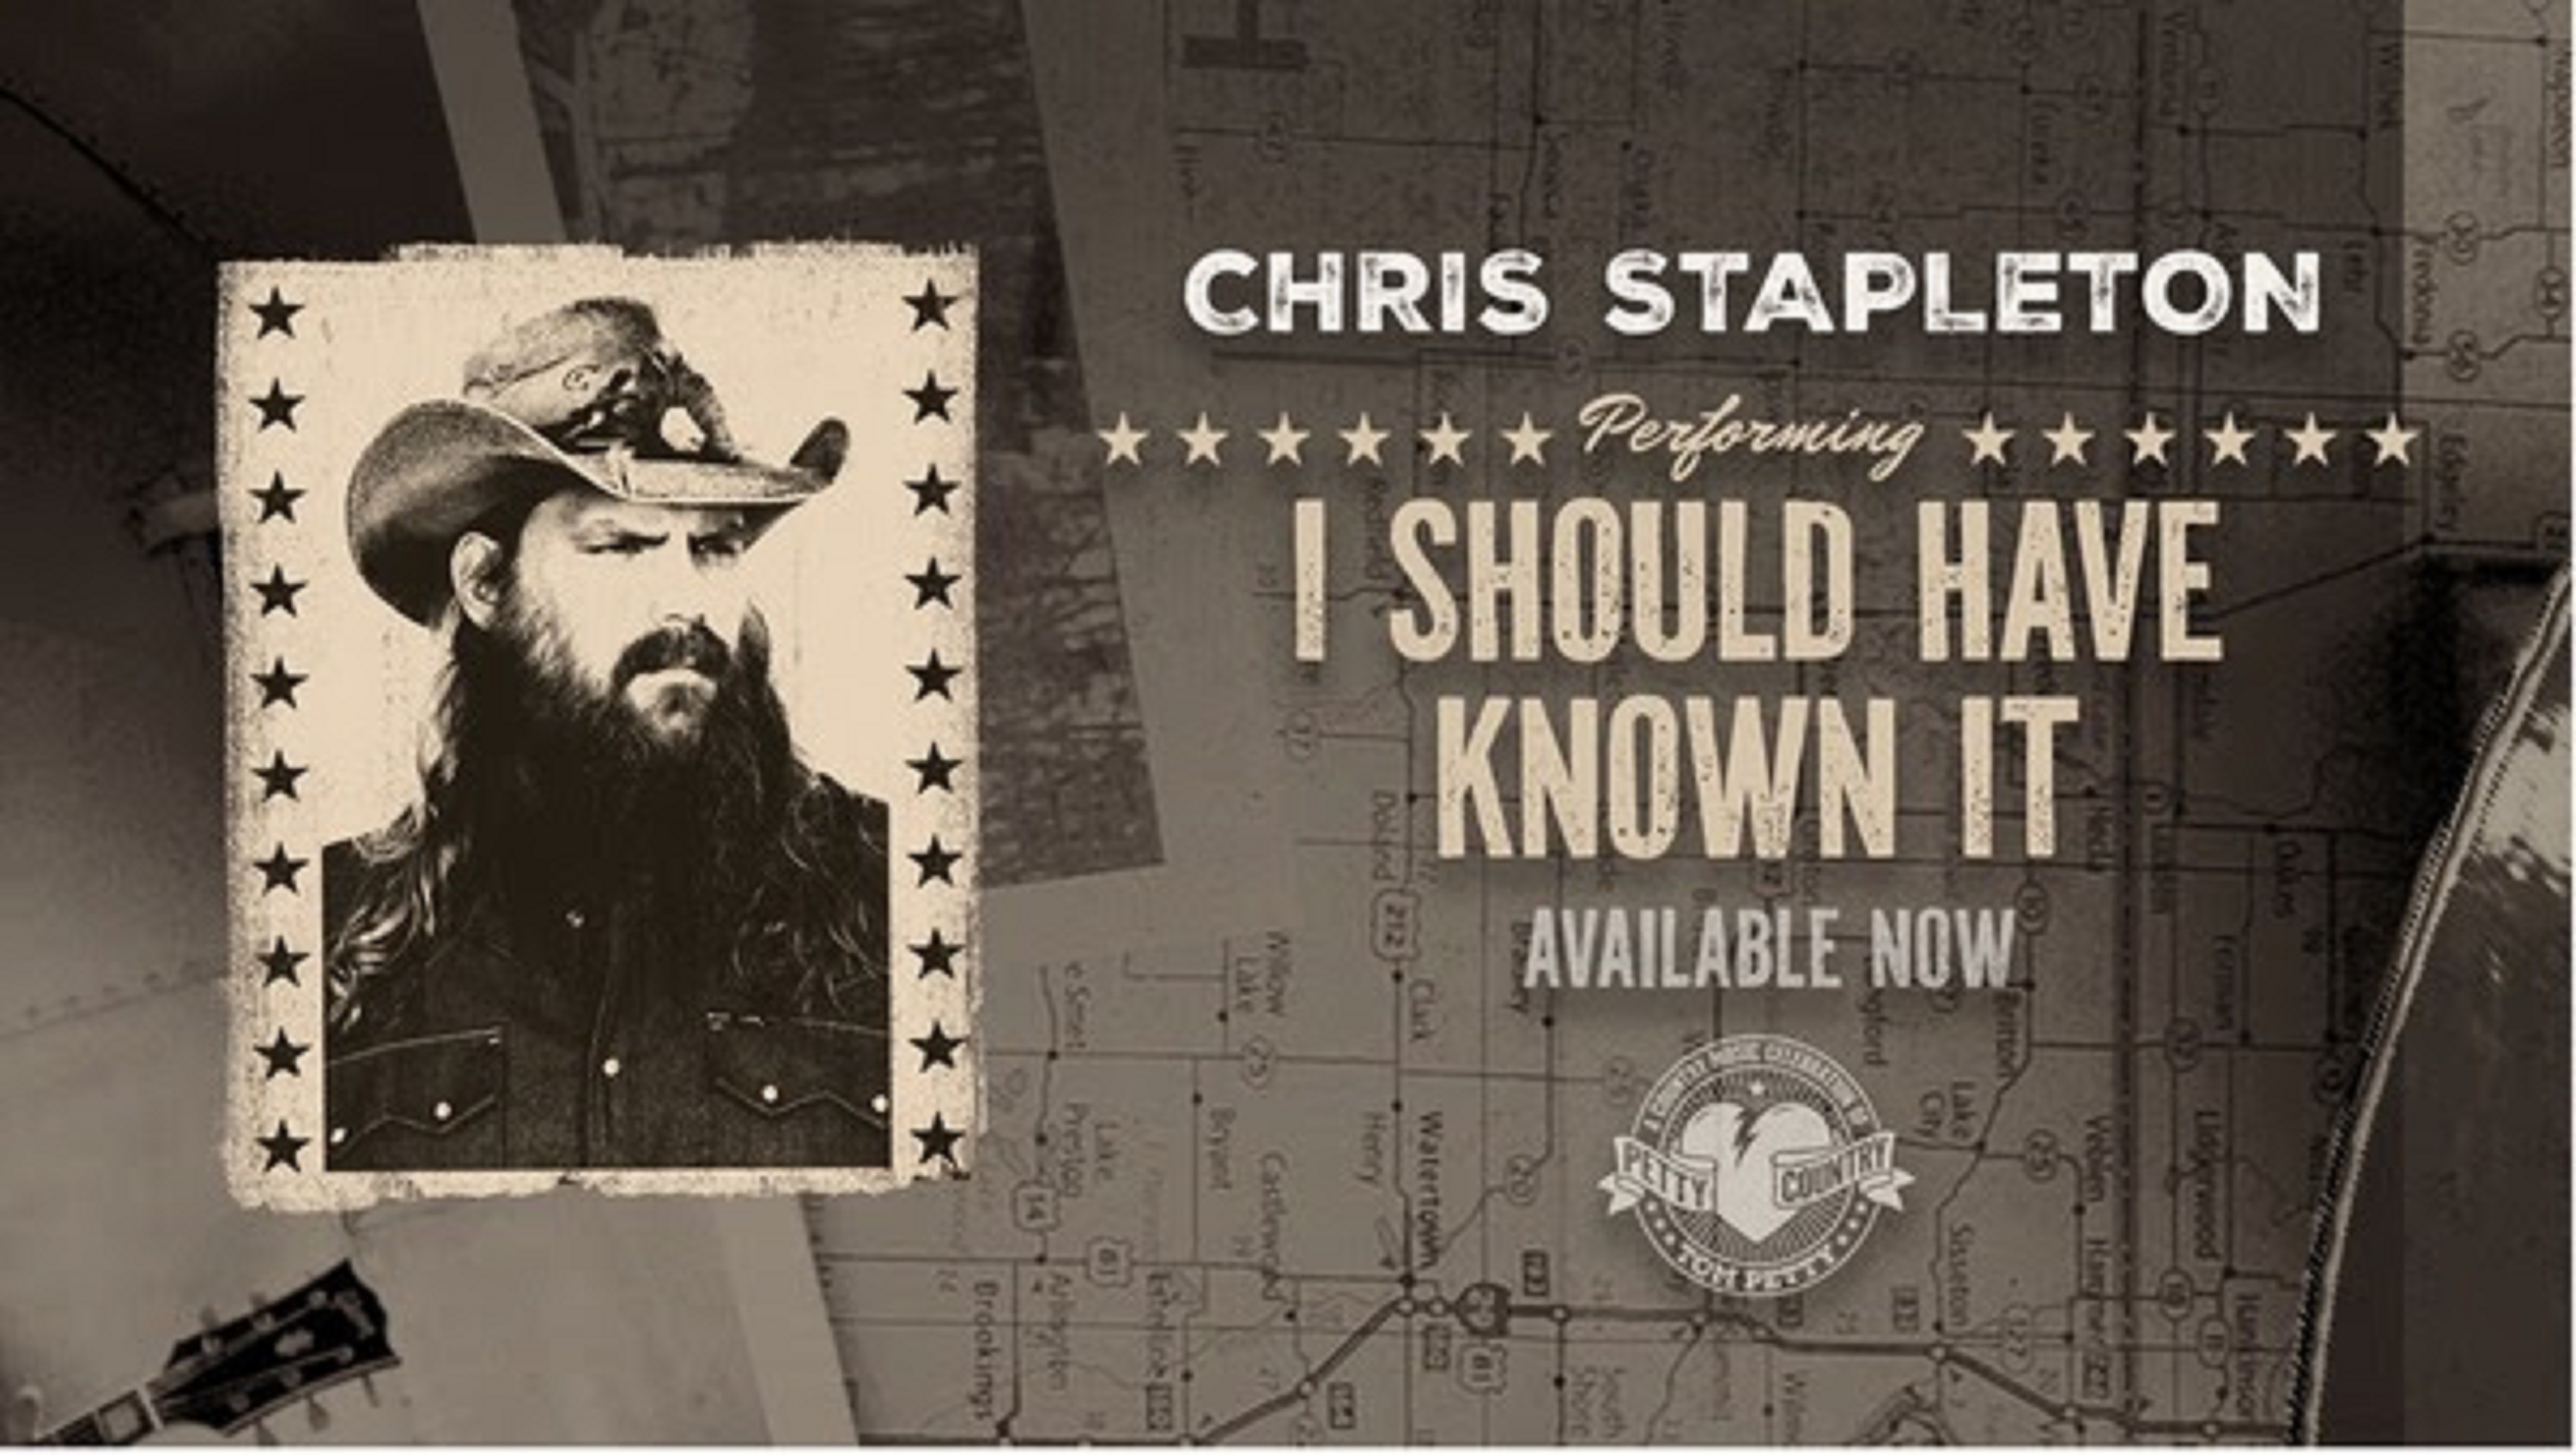 CHRIS STAPLETON’S VERSION OF TOM PETTY’S “I SHOULD HAVE KNOWN IT” DEBUTS TODAY